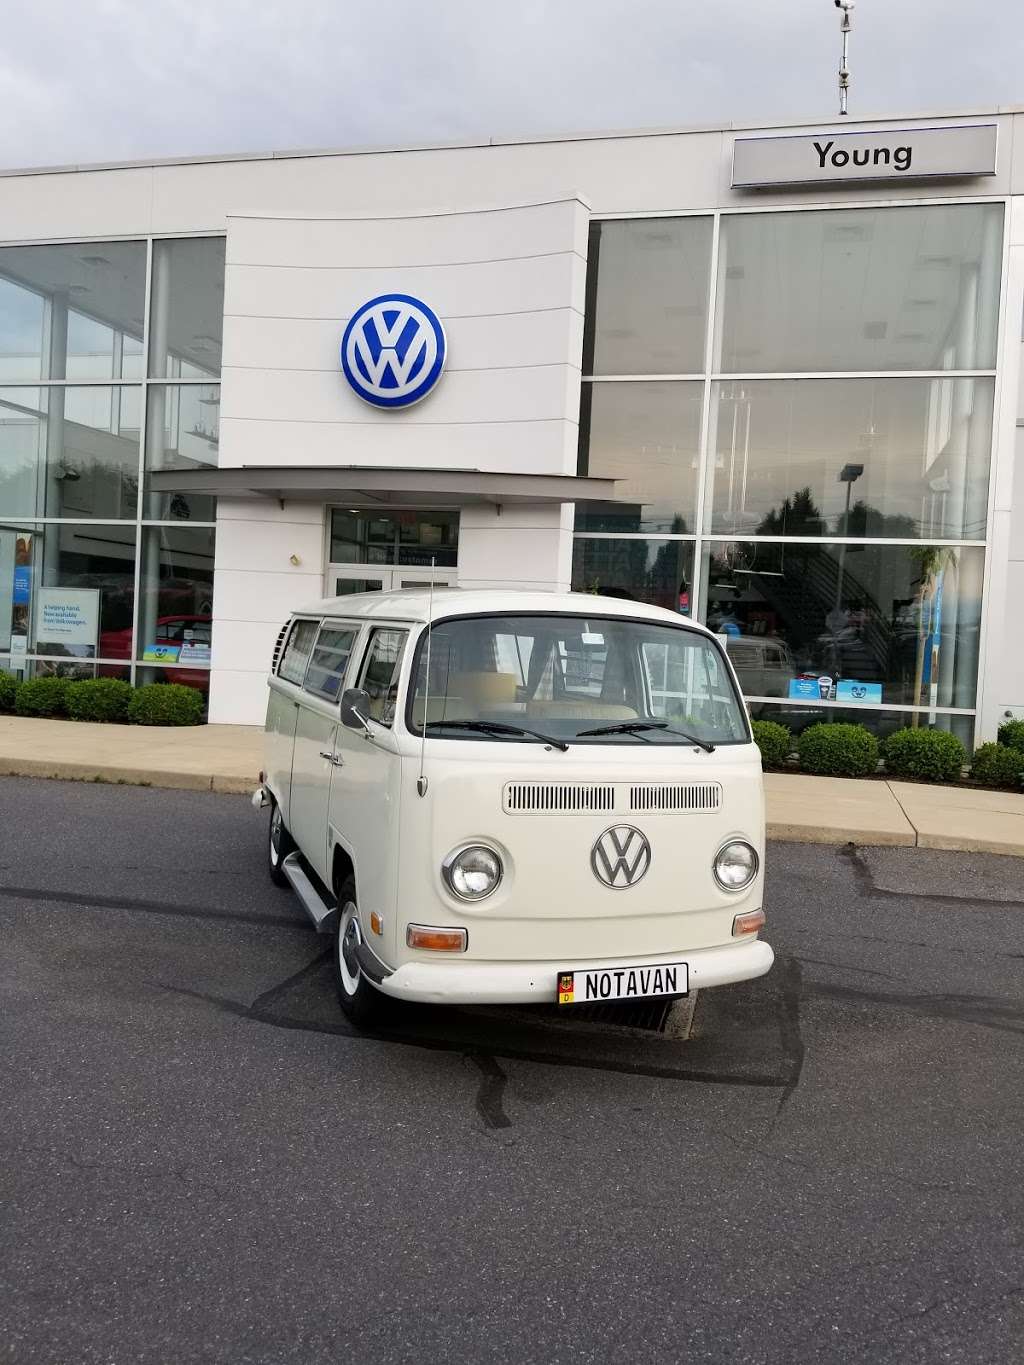 Young Volkswagen | 191 Commerce Park Dr, Easton, PA 18045 | Phone: (866) 308-6717